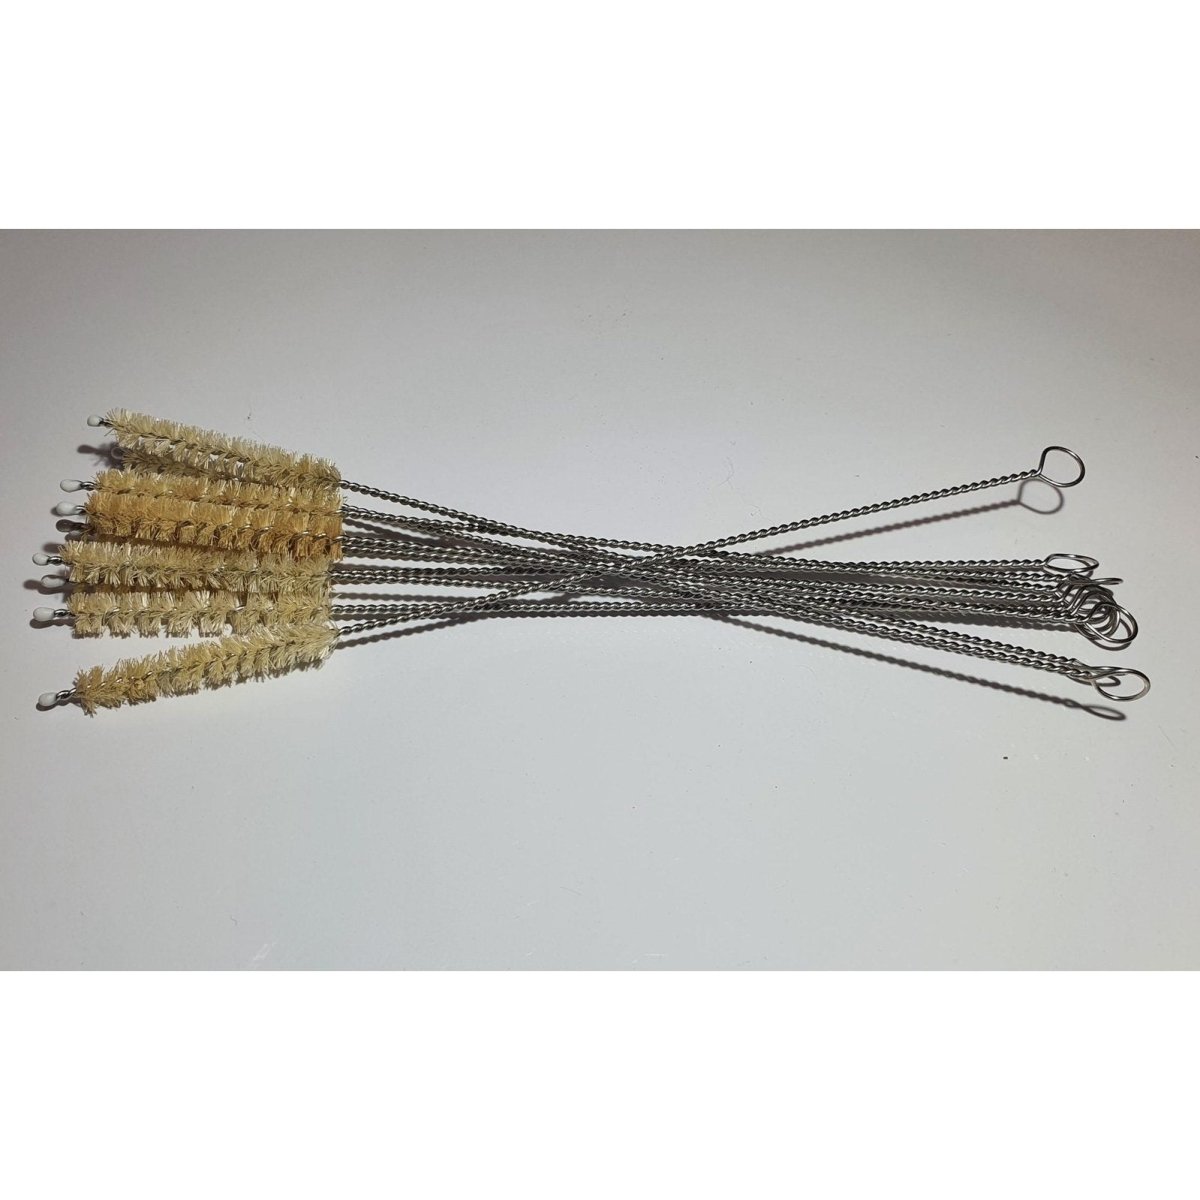 A Bundle of Straw Cleaning Brushes with Hemp Sisal Bristles, from MiEco